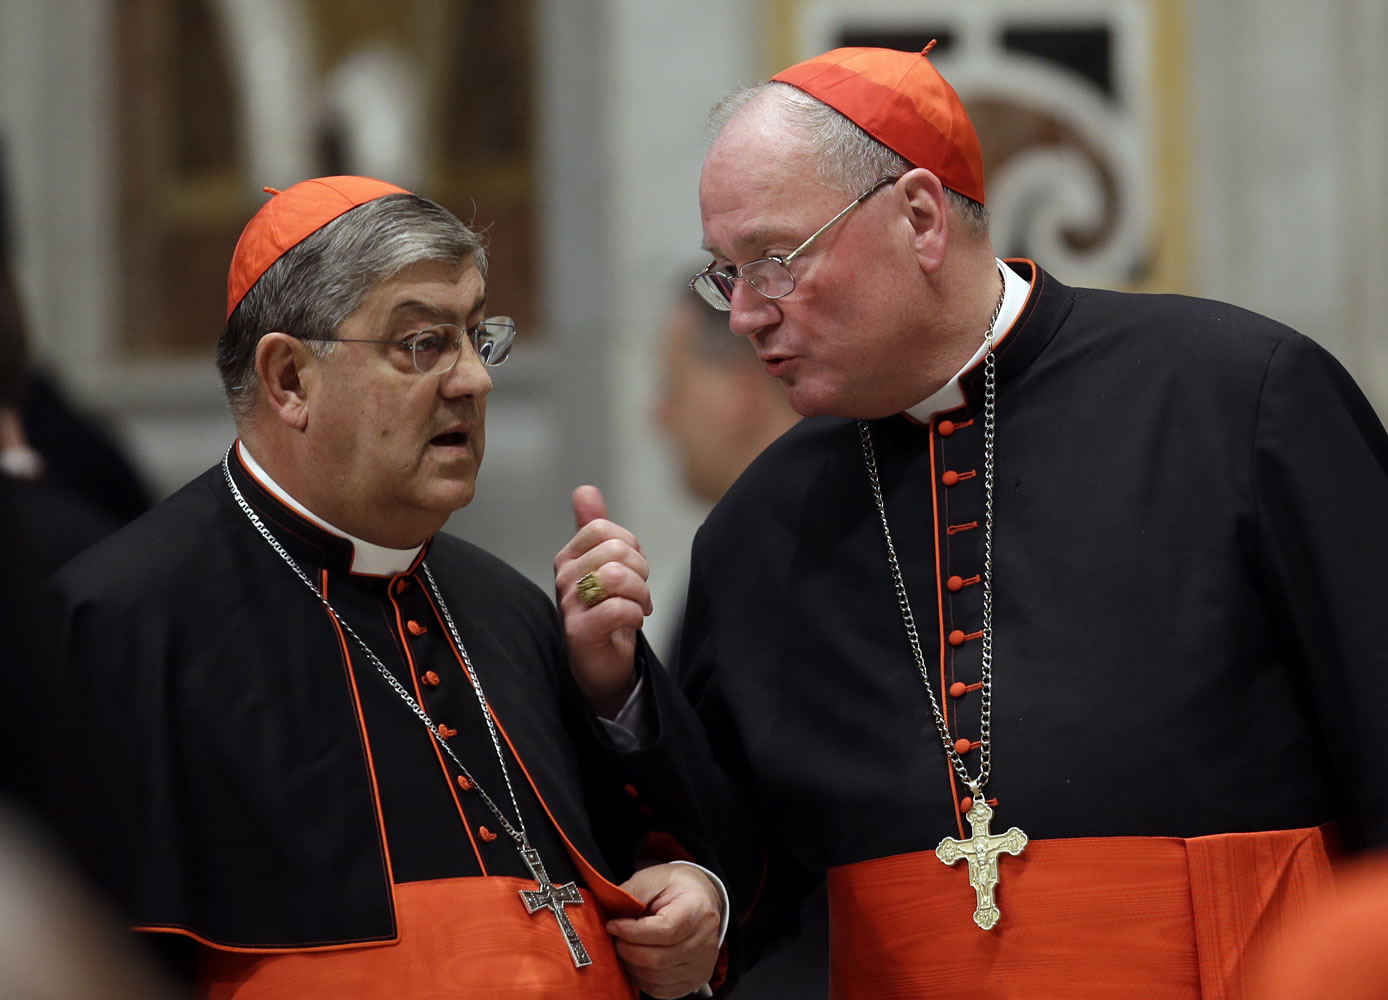 Cardinal Crescenzio Sepe, left, listens to Cardinal Timothy Dolan as they gather Wednesday in St.